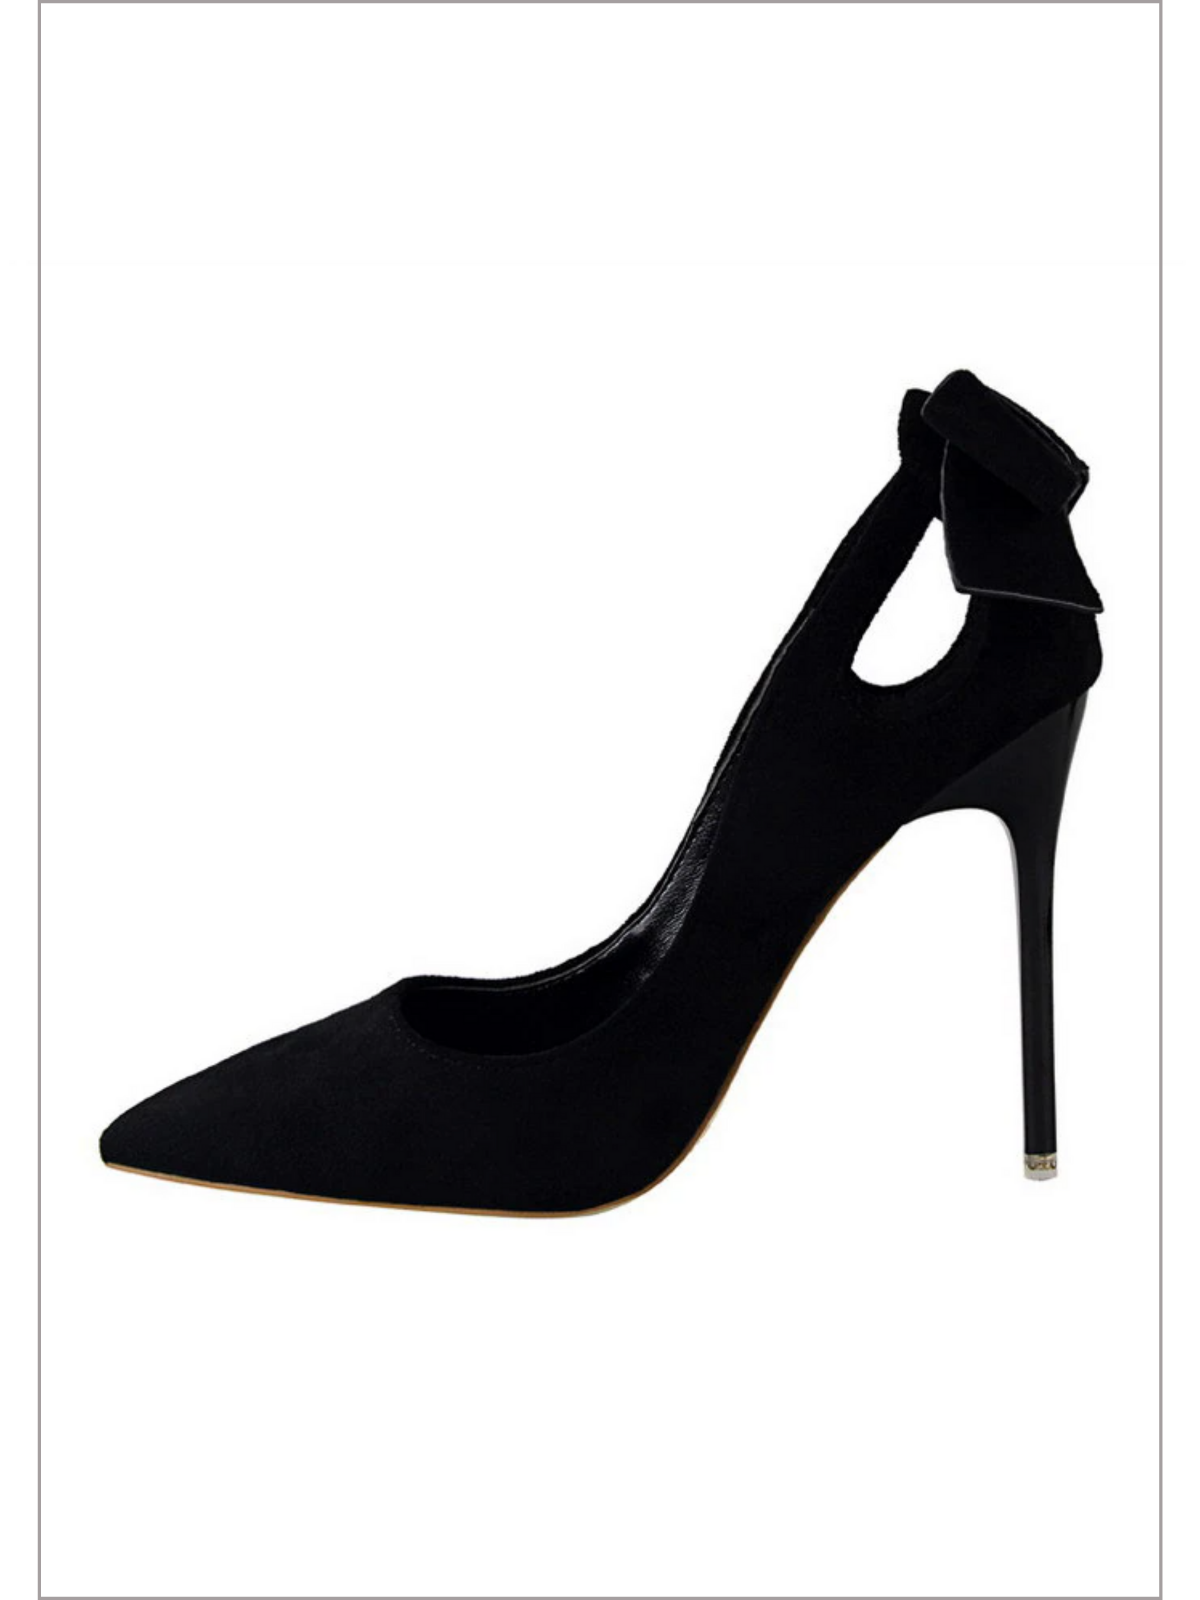 Black High Heels: A basic guide to wear this classic shoes in stylish –  Onpost